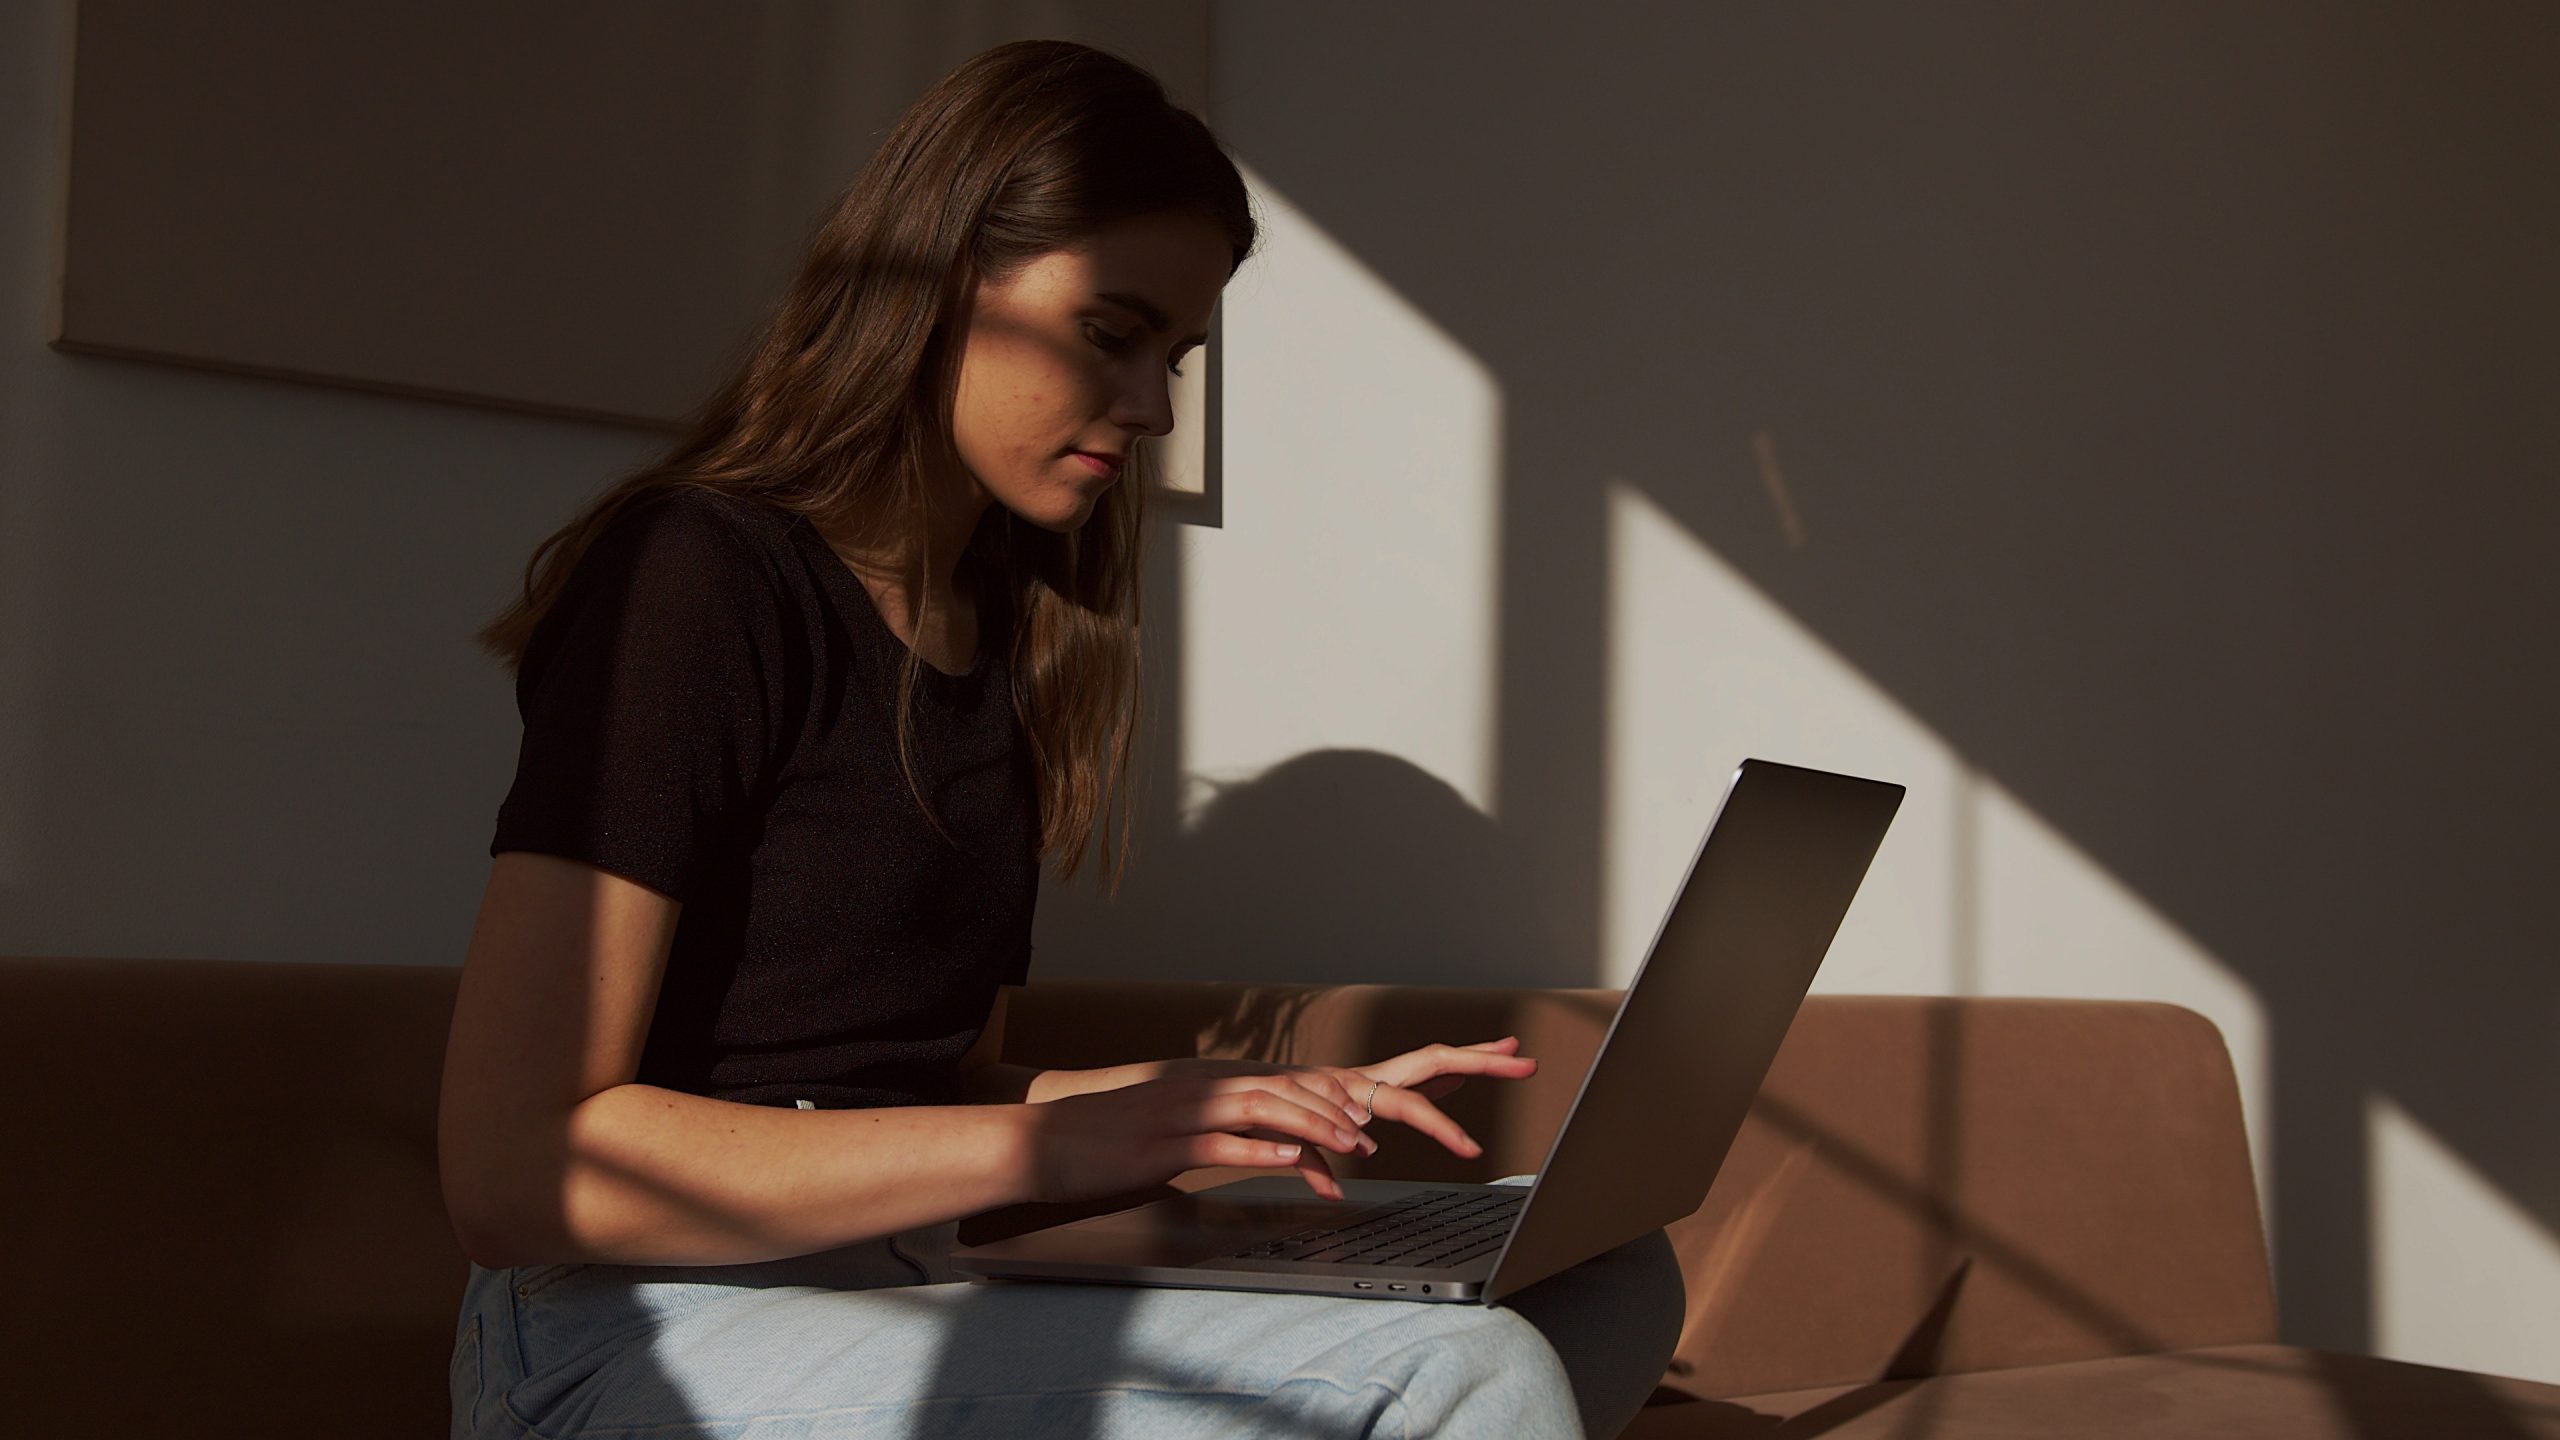 A young woman sits in the shadows while she searches on a laptop